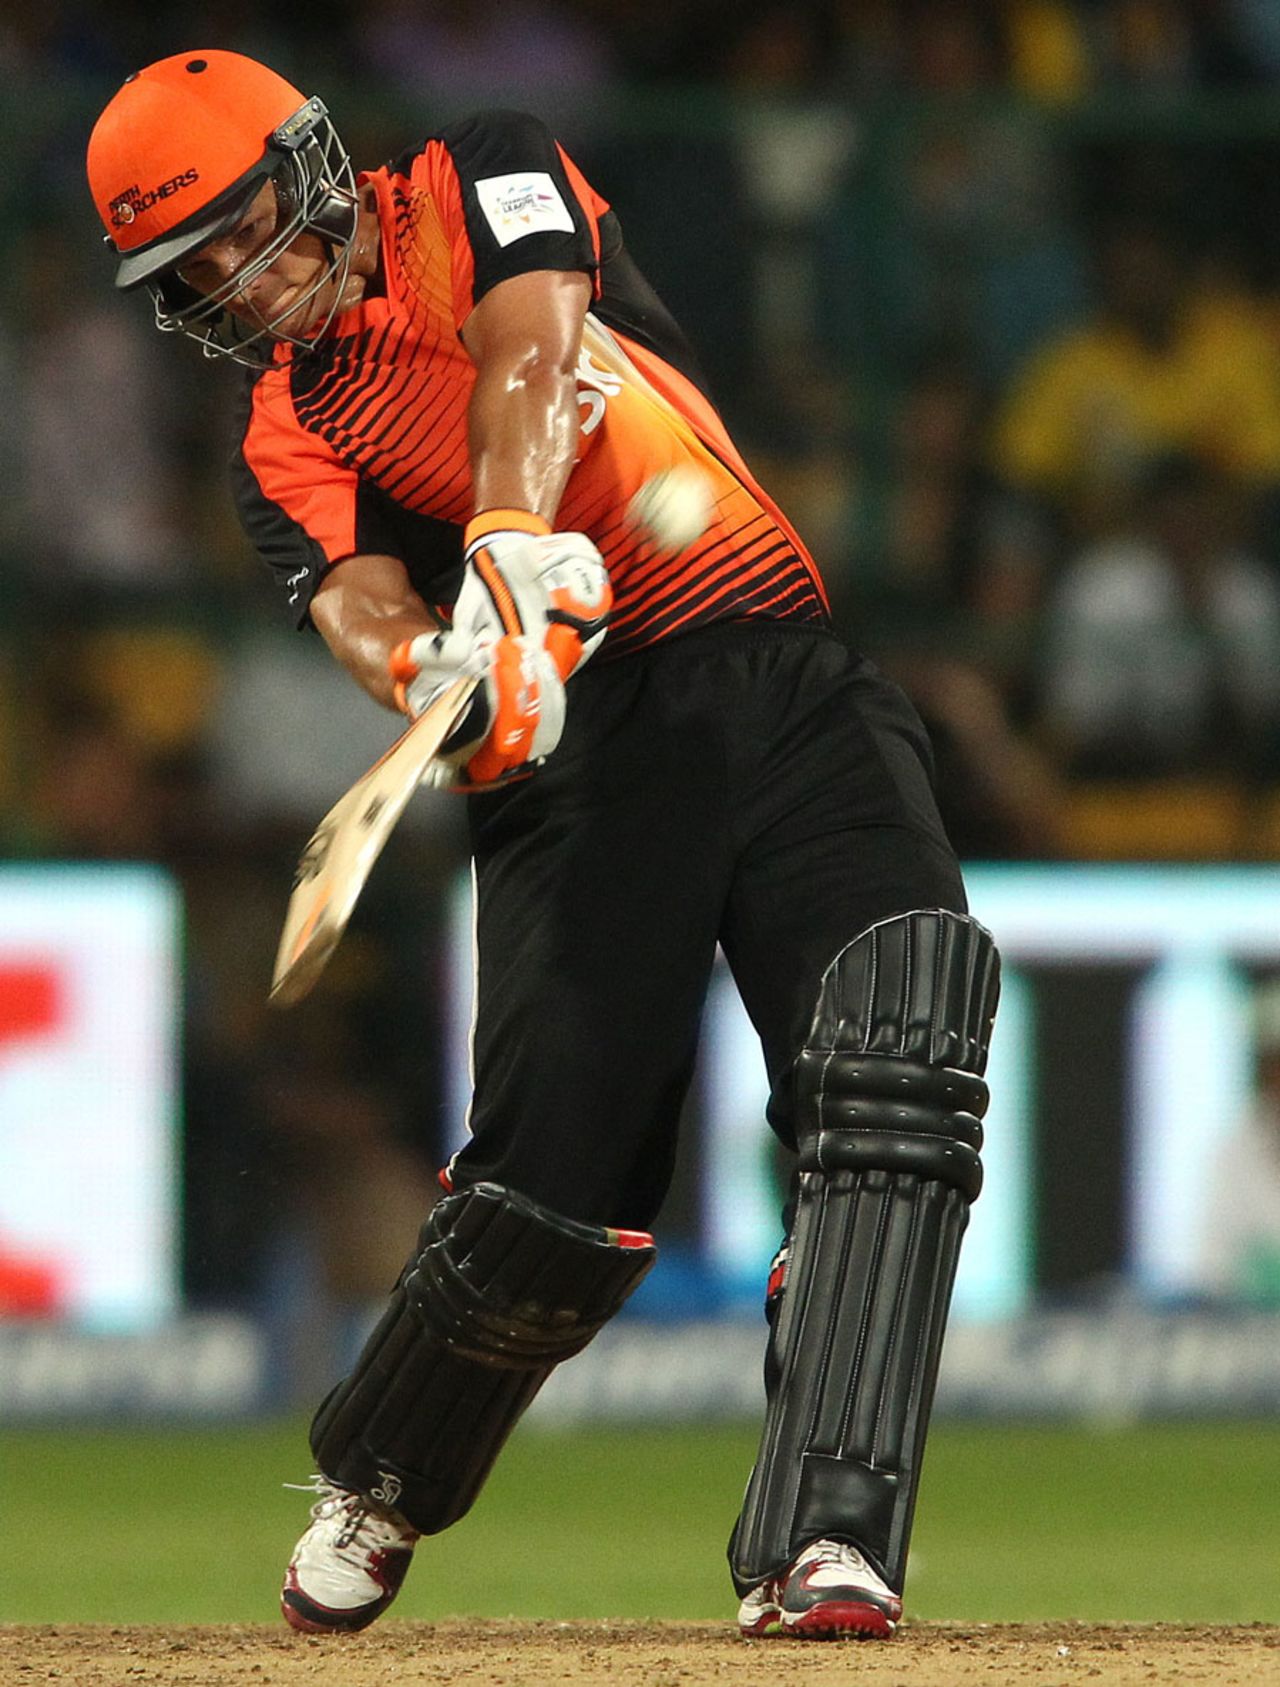 Nathan Coulter-Nile hits out, Chennai Super Kings v Perth Scorchers, Champions League T20, Bangalore, September 27, 2014